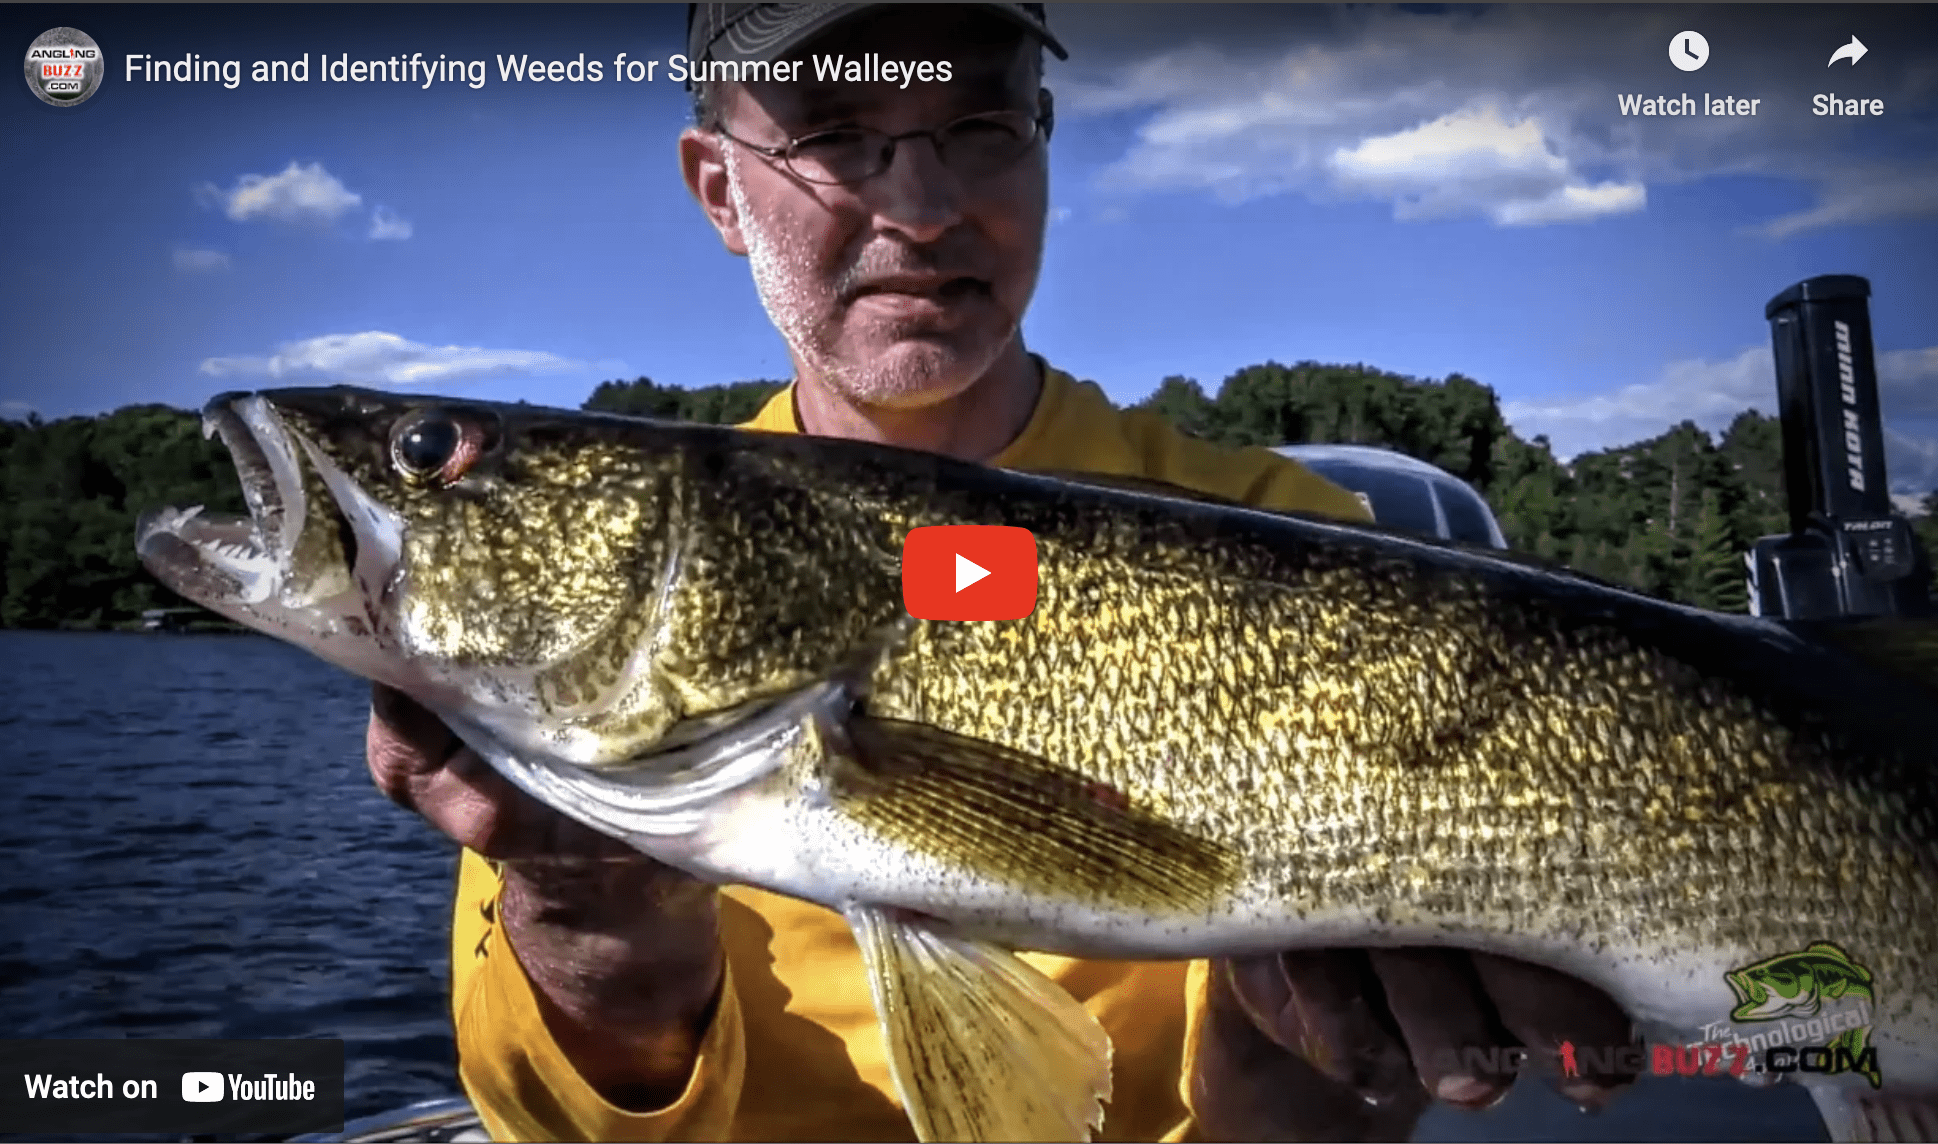 Weeds for Summer Walleyes